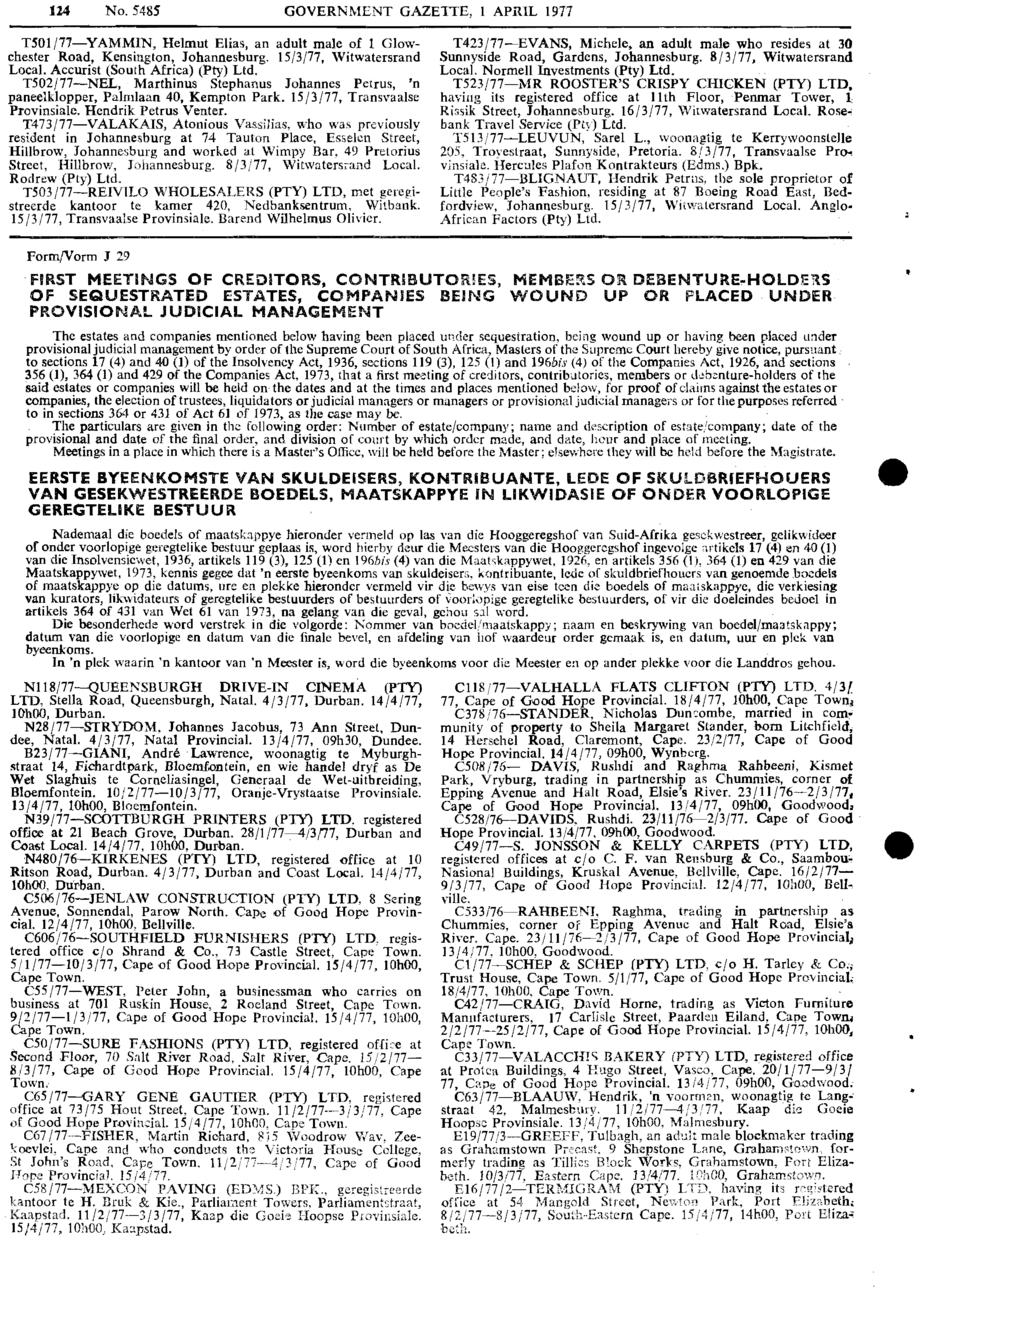 124 No. 5485 GOVERNMENT GAZETTE, 1 APRIL 1977 T501/77-YAMMIN, Helmut Elias, an adult male of 1 Glowchester Road, Kensington, Johannesburg. 15/3/77. Witwatersrand Local.